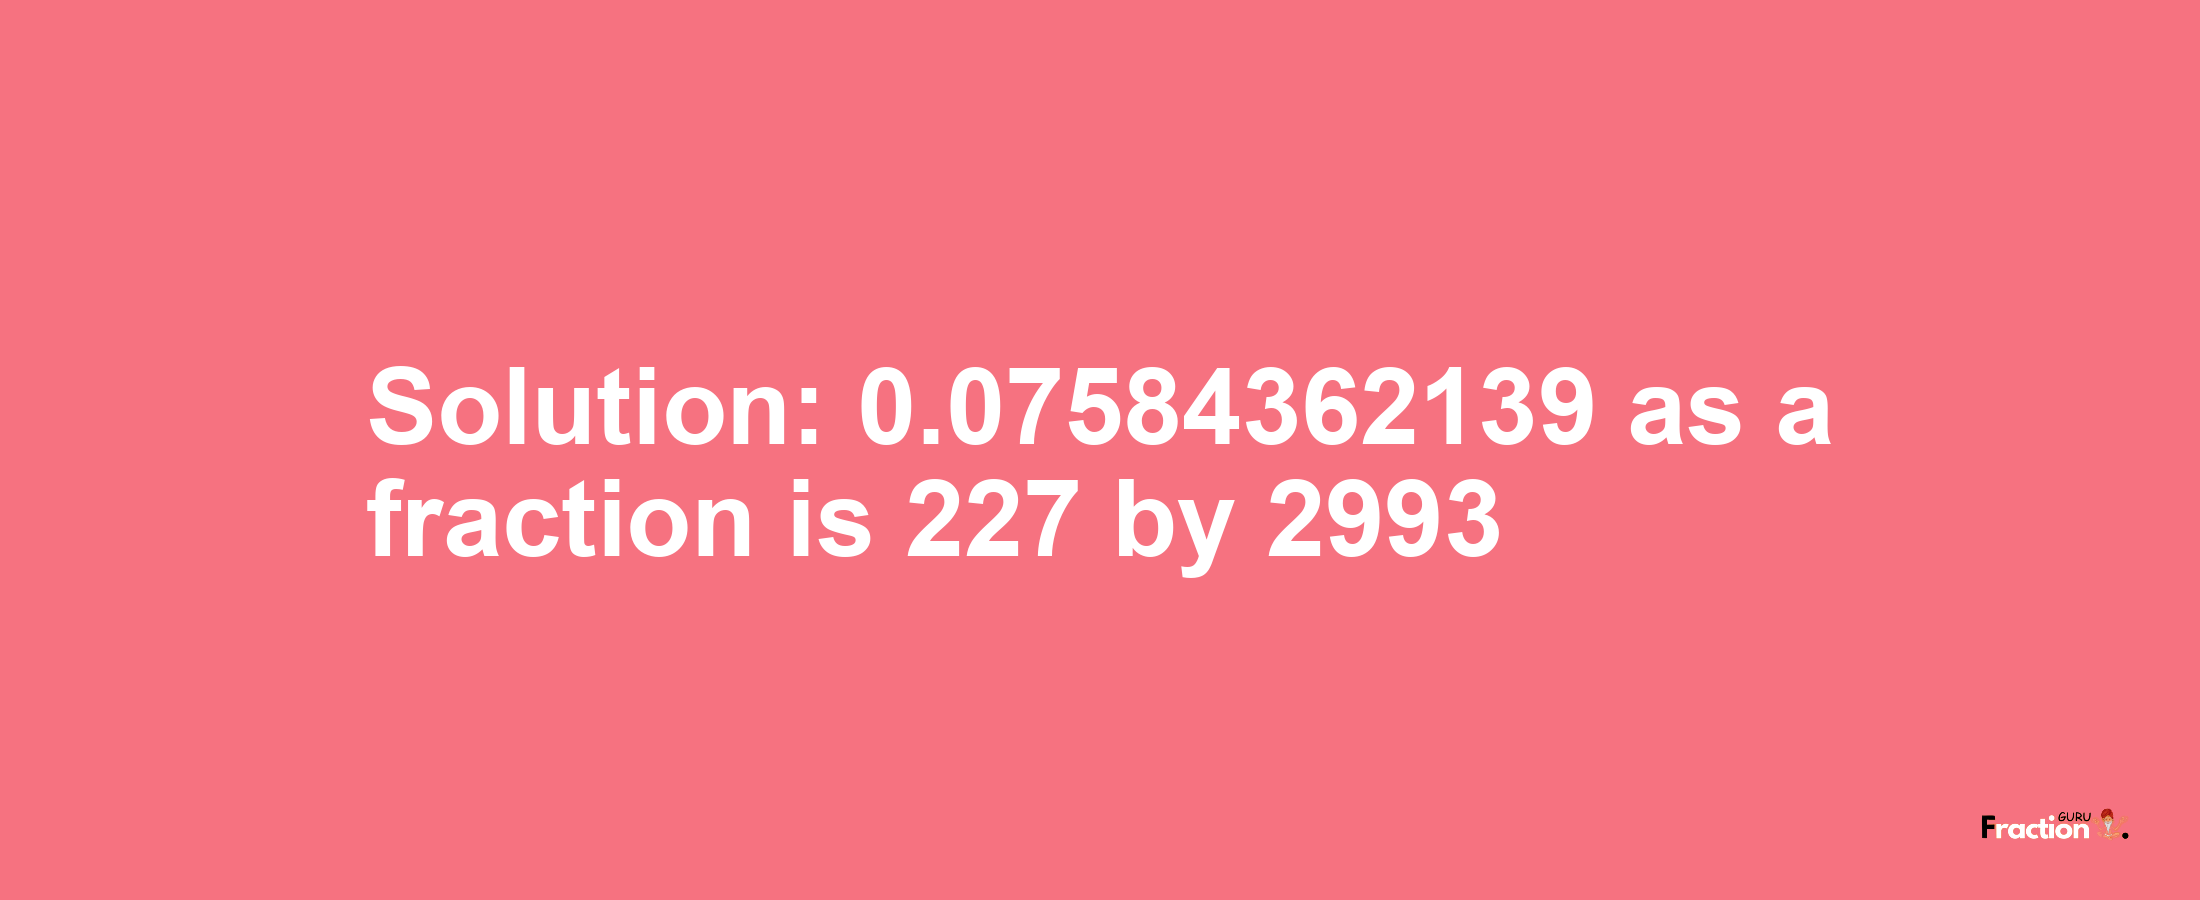 Solution:0.07584362139 as a fraction is 227/2993